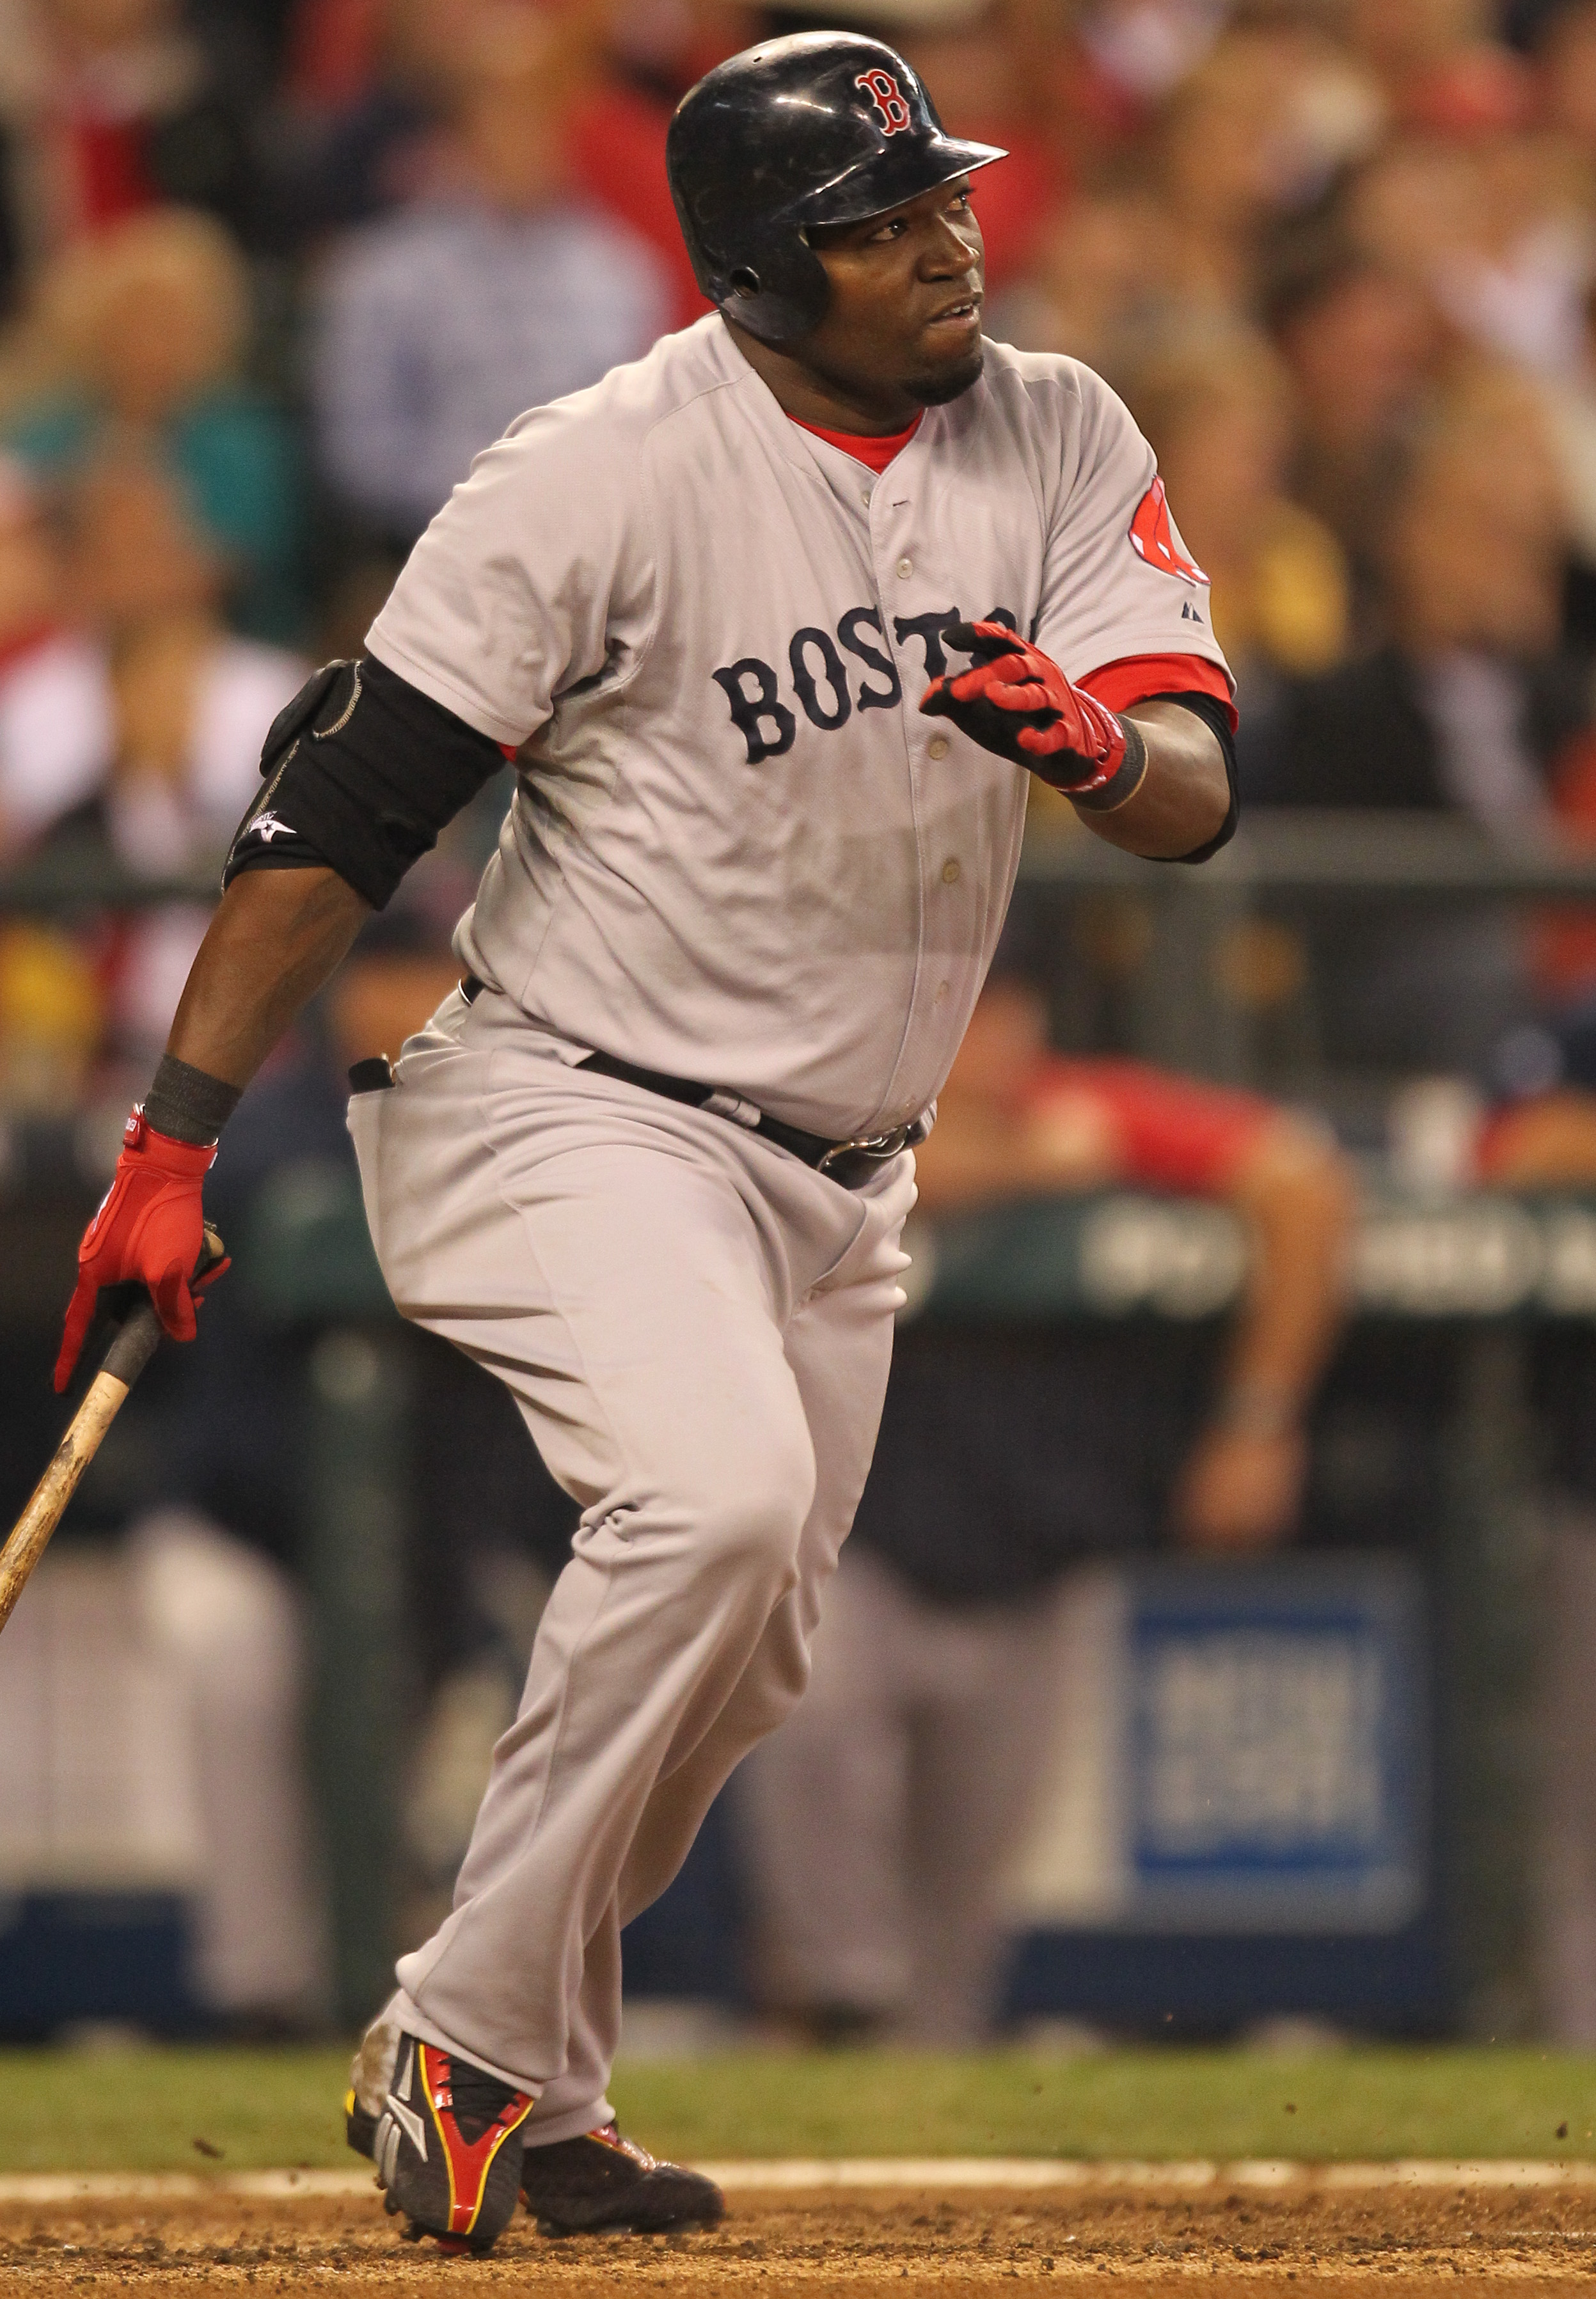 SEATTLE - SEPTEMBER 15:  David Ortiz #34 of the Boston Red Sox bats against the Seattle Mariners at Safeco Field on September 15, 2010 in Seattle, Washington. (Photo by Otto Greule Jr/Getty Images)